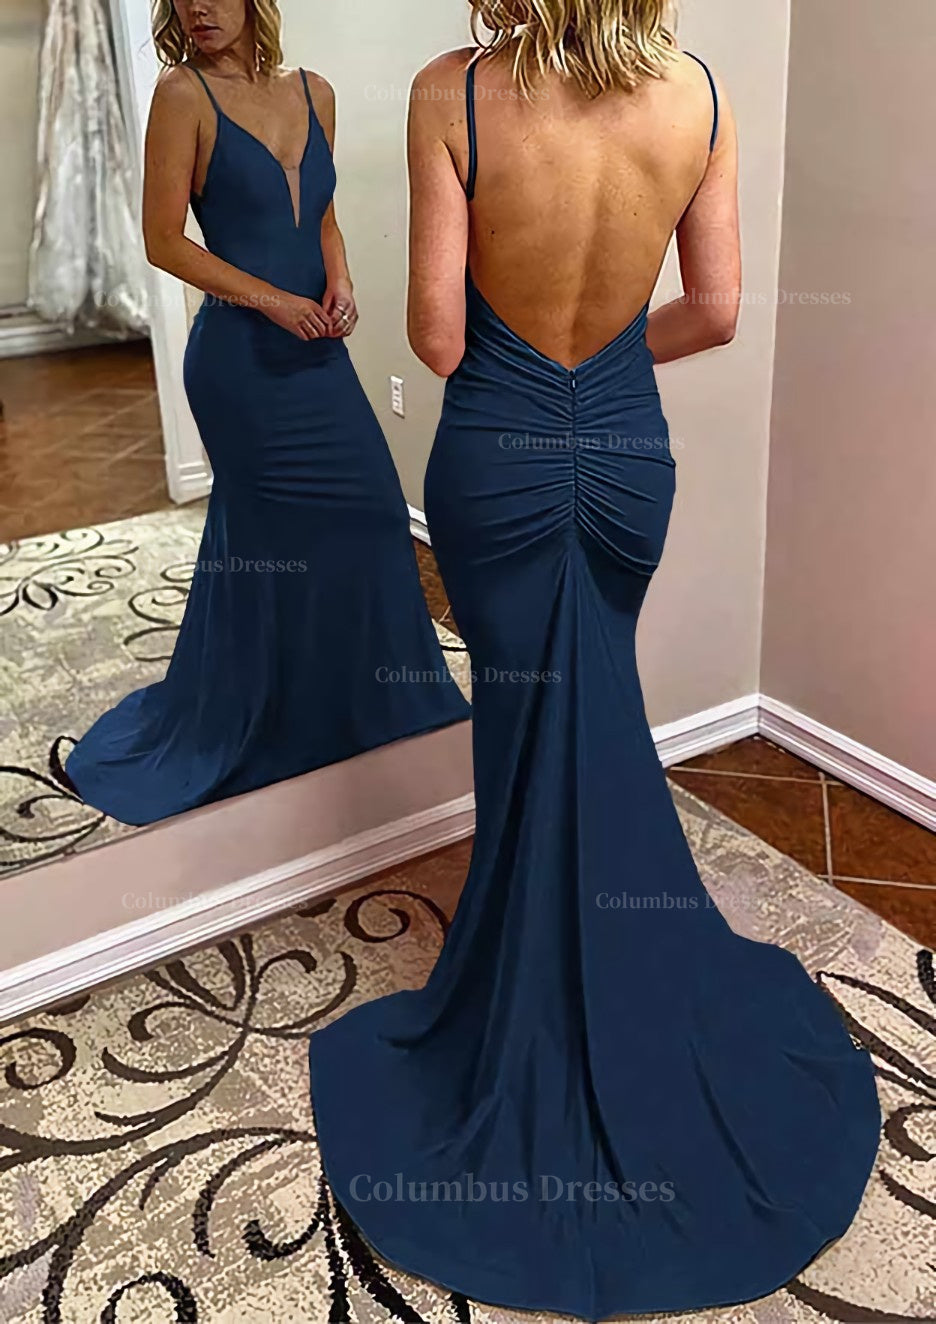 Formal Dress For Wedding Party, Trumpet/Mermaid V Neck Spaghetti Straps Court Train Jersey Prom Dress With Pleated